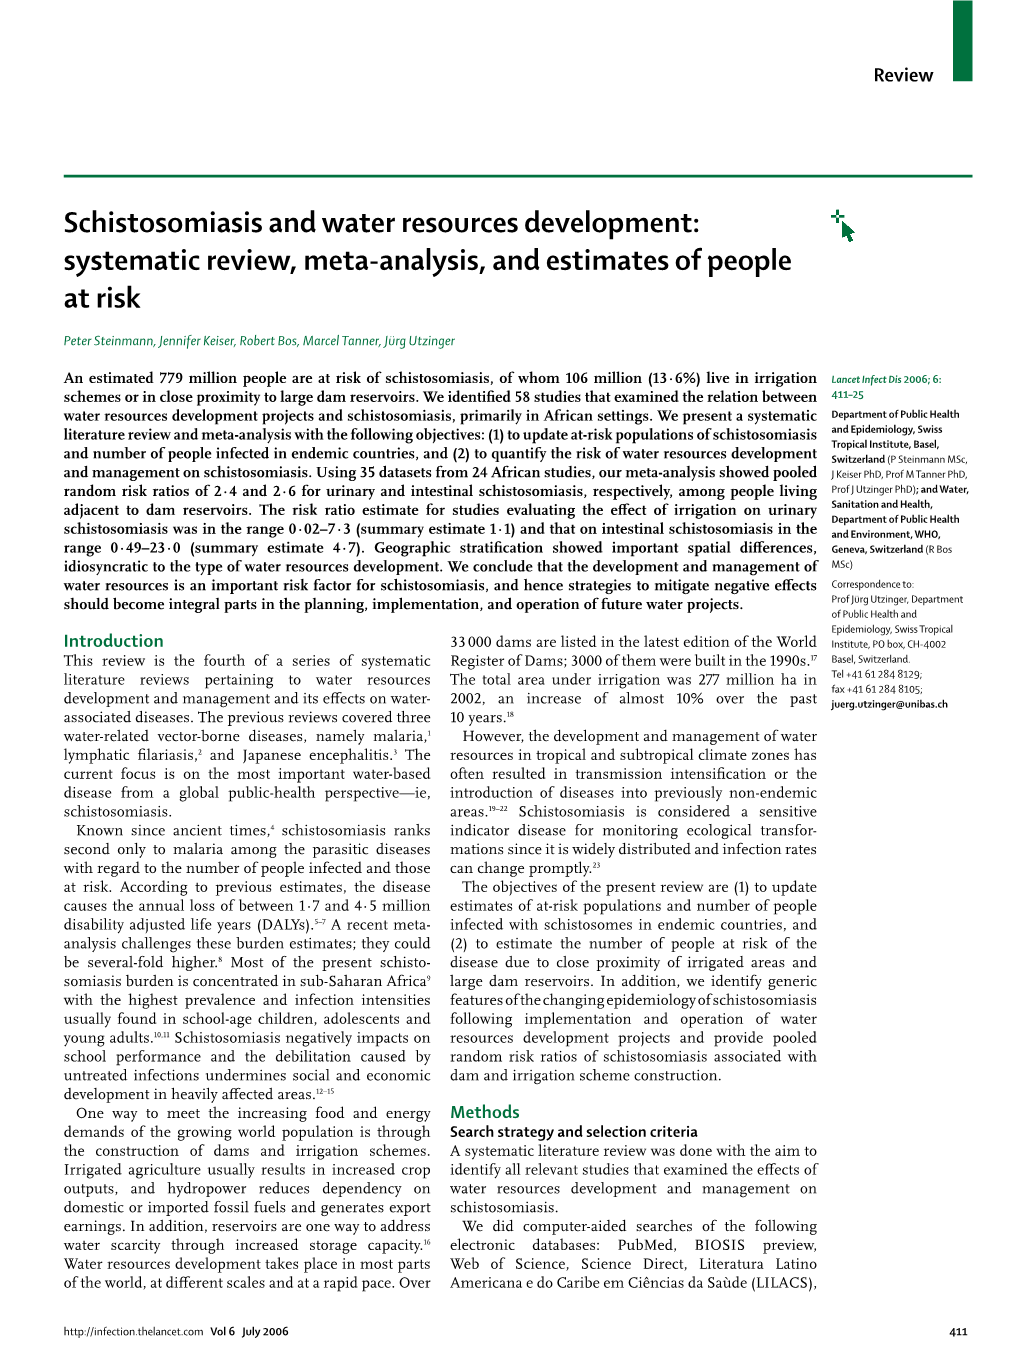 Schistosomiasis and Water Resources Development: Systematic Review, Meta-Analysis, and Estimates of People at Risk